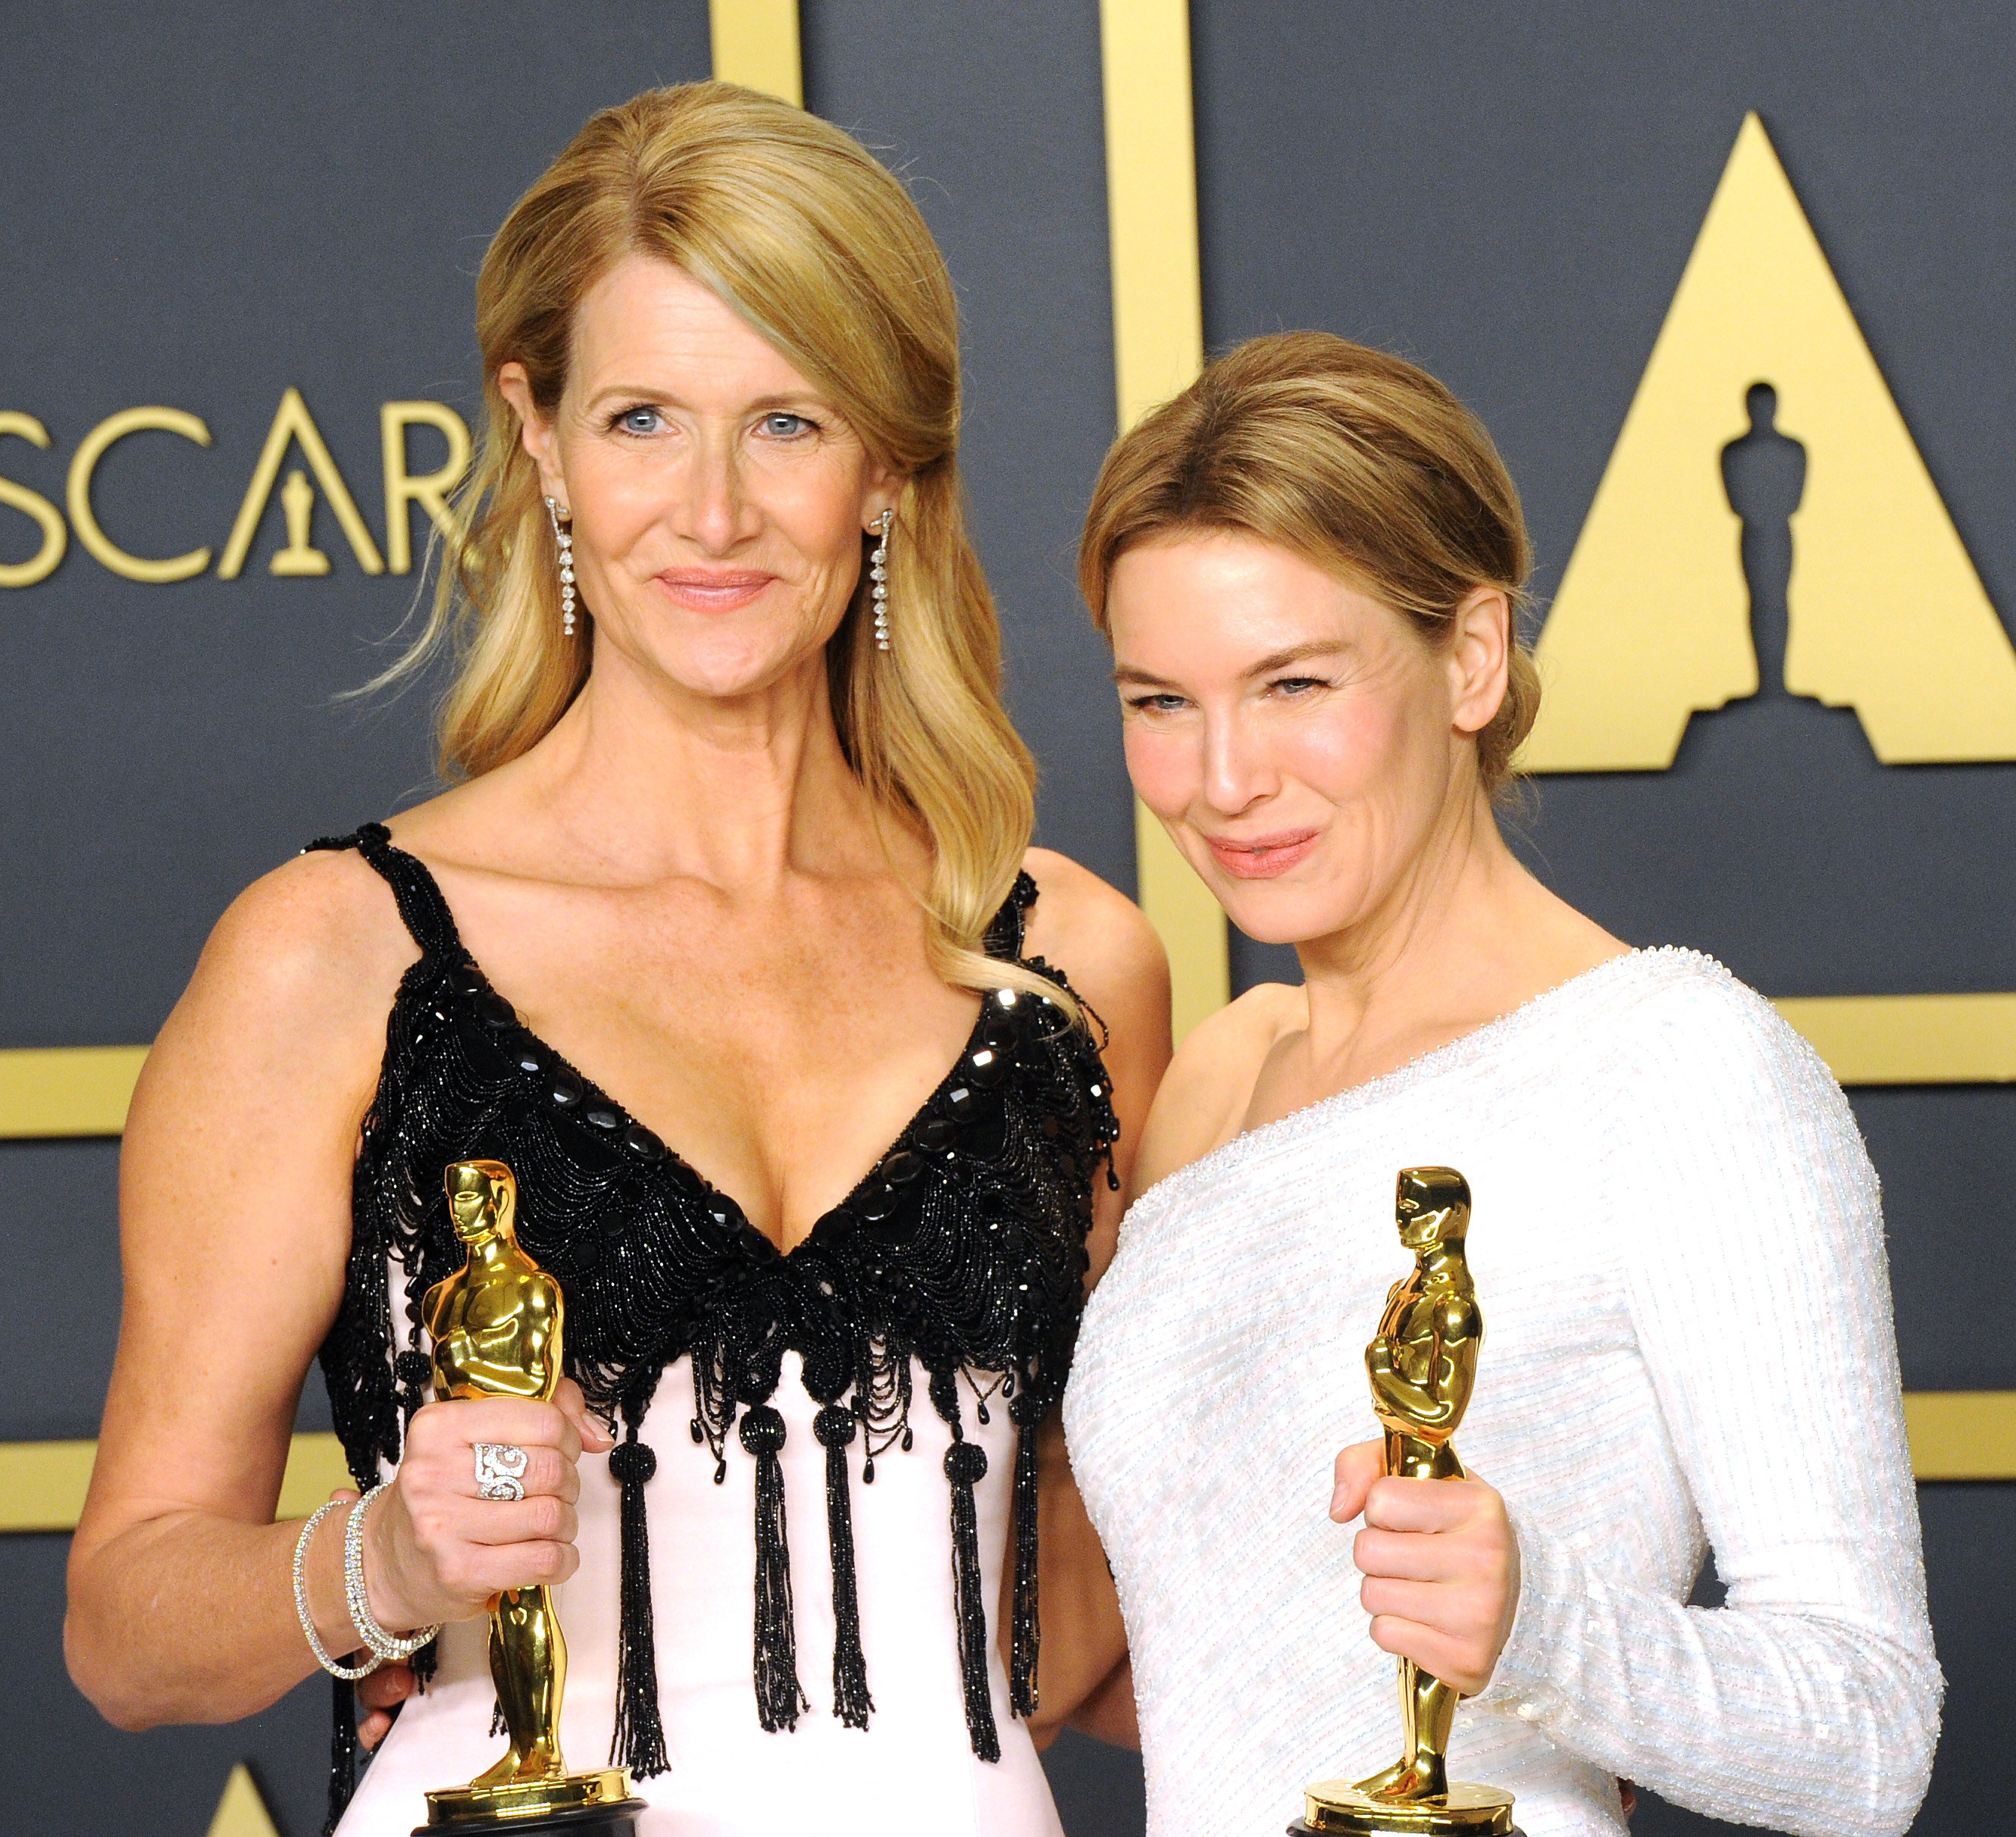 Laura Dern and Renee Zellweger holding their Oscars backstage